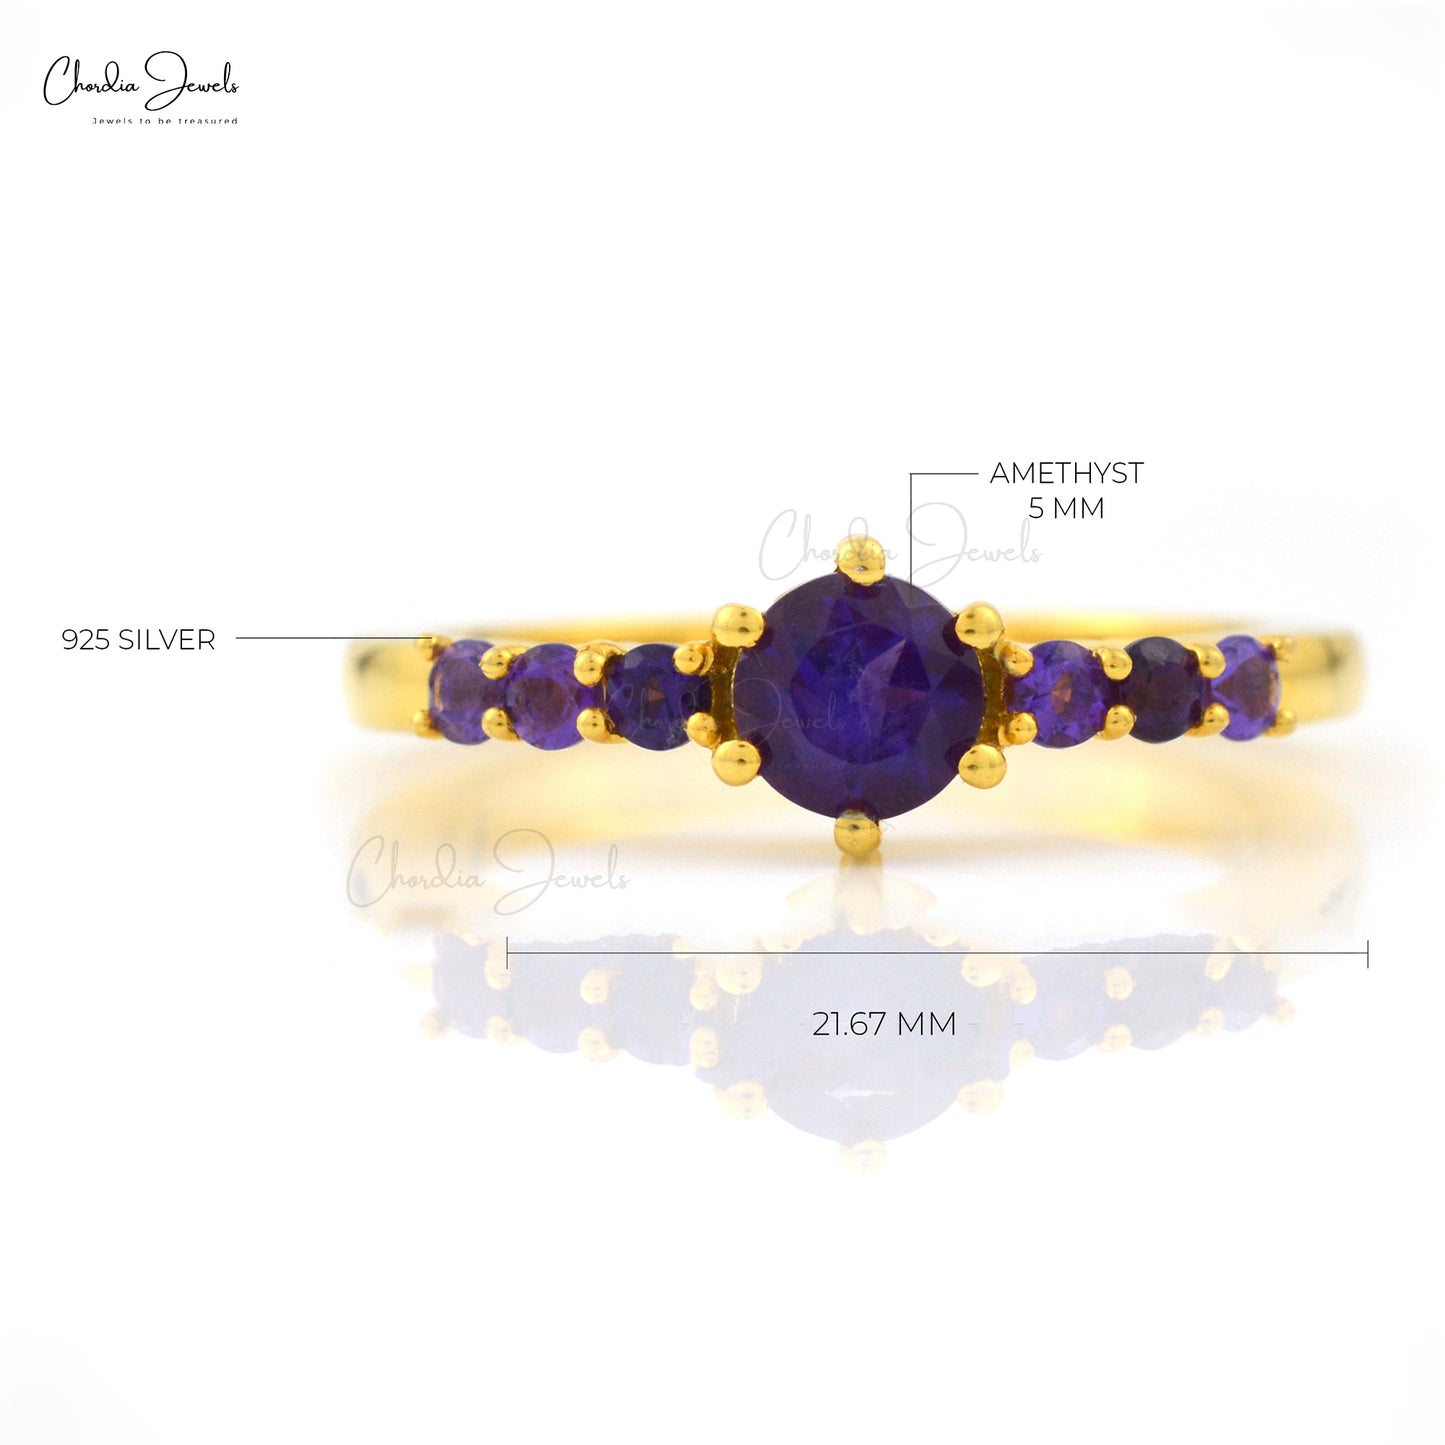 Load image into Gallery viewer, 925 Sterling Silver Genuine Amethyst Ring  Prong Set Handmade Gemstone Ring February Birthstone Fashion Jewelry At Offer Price
